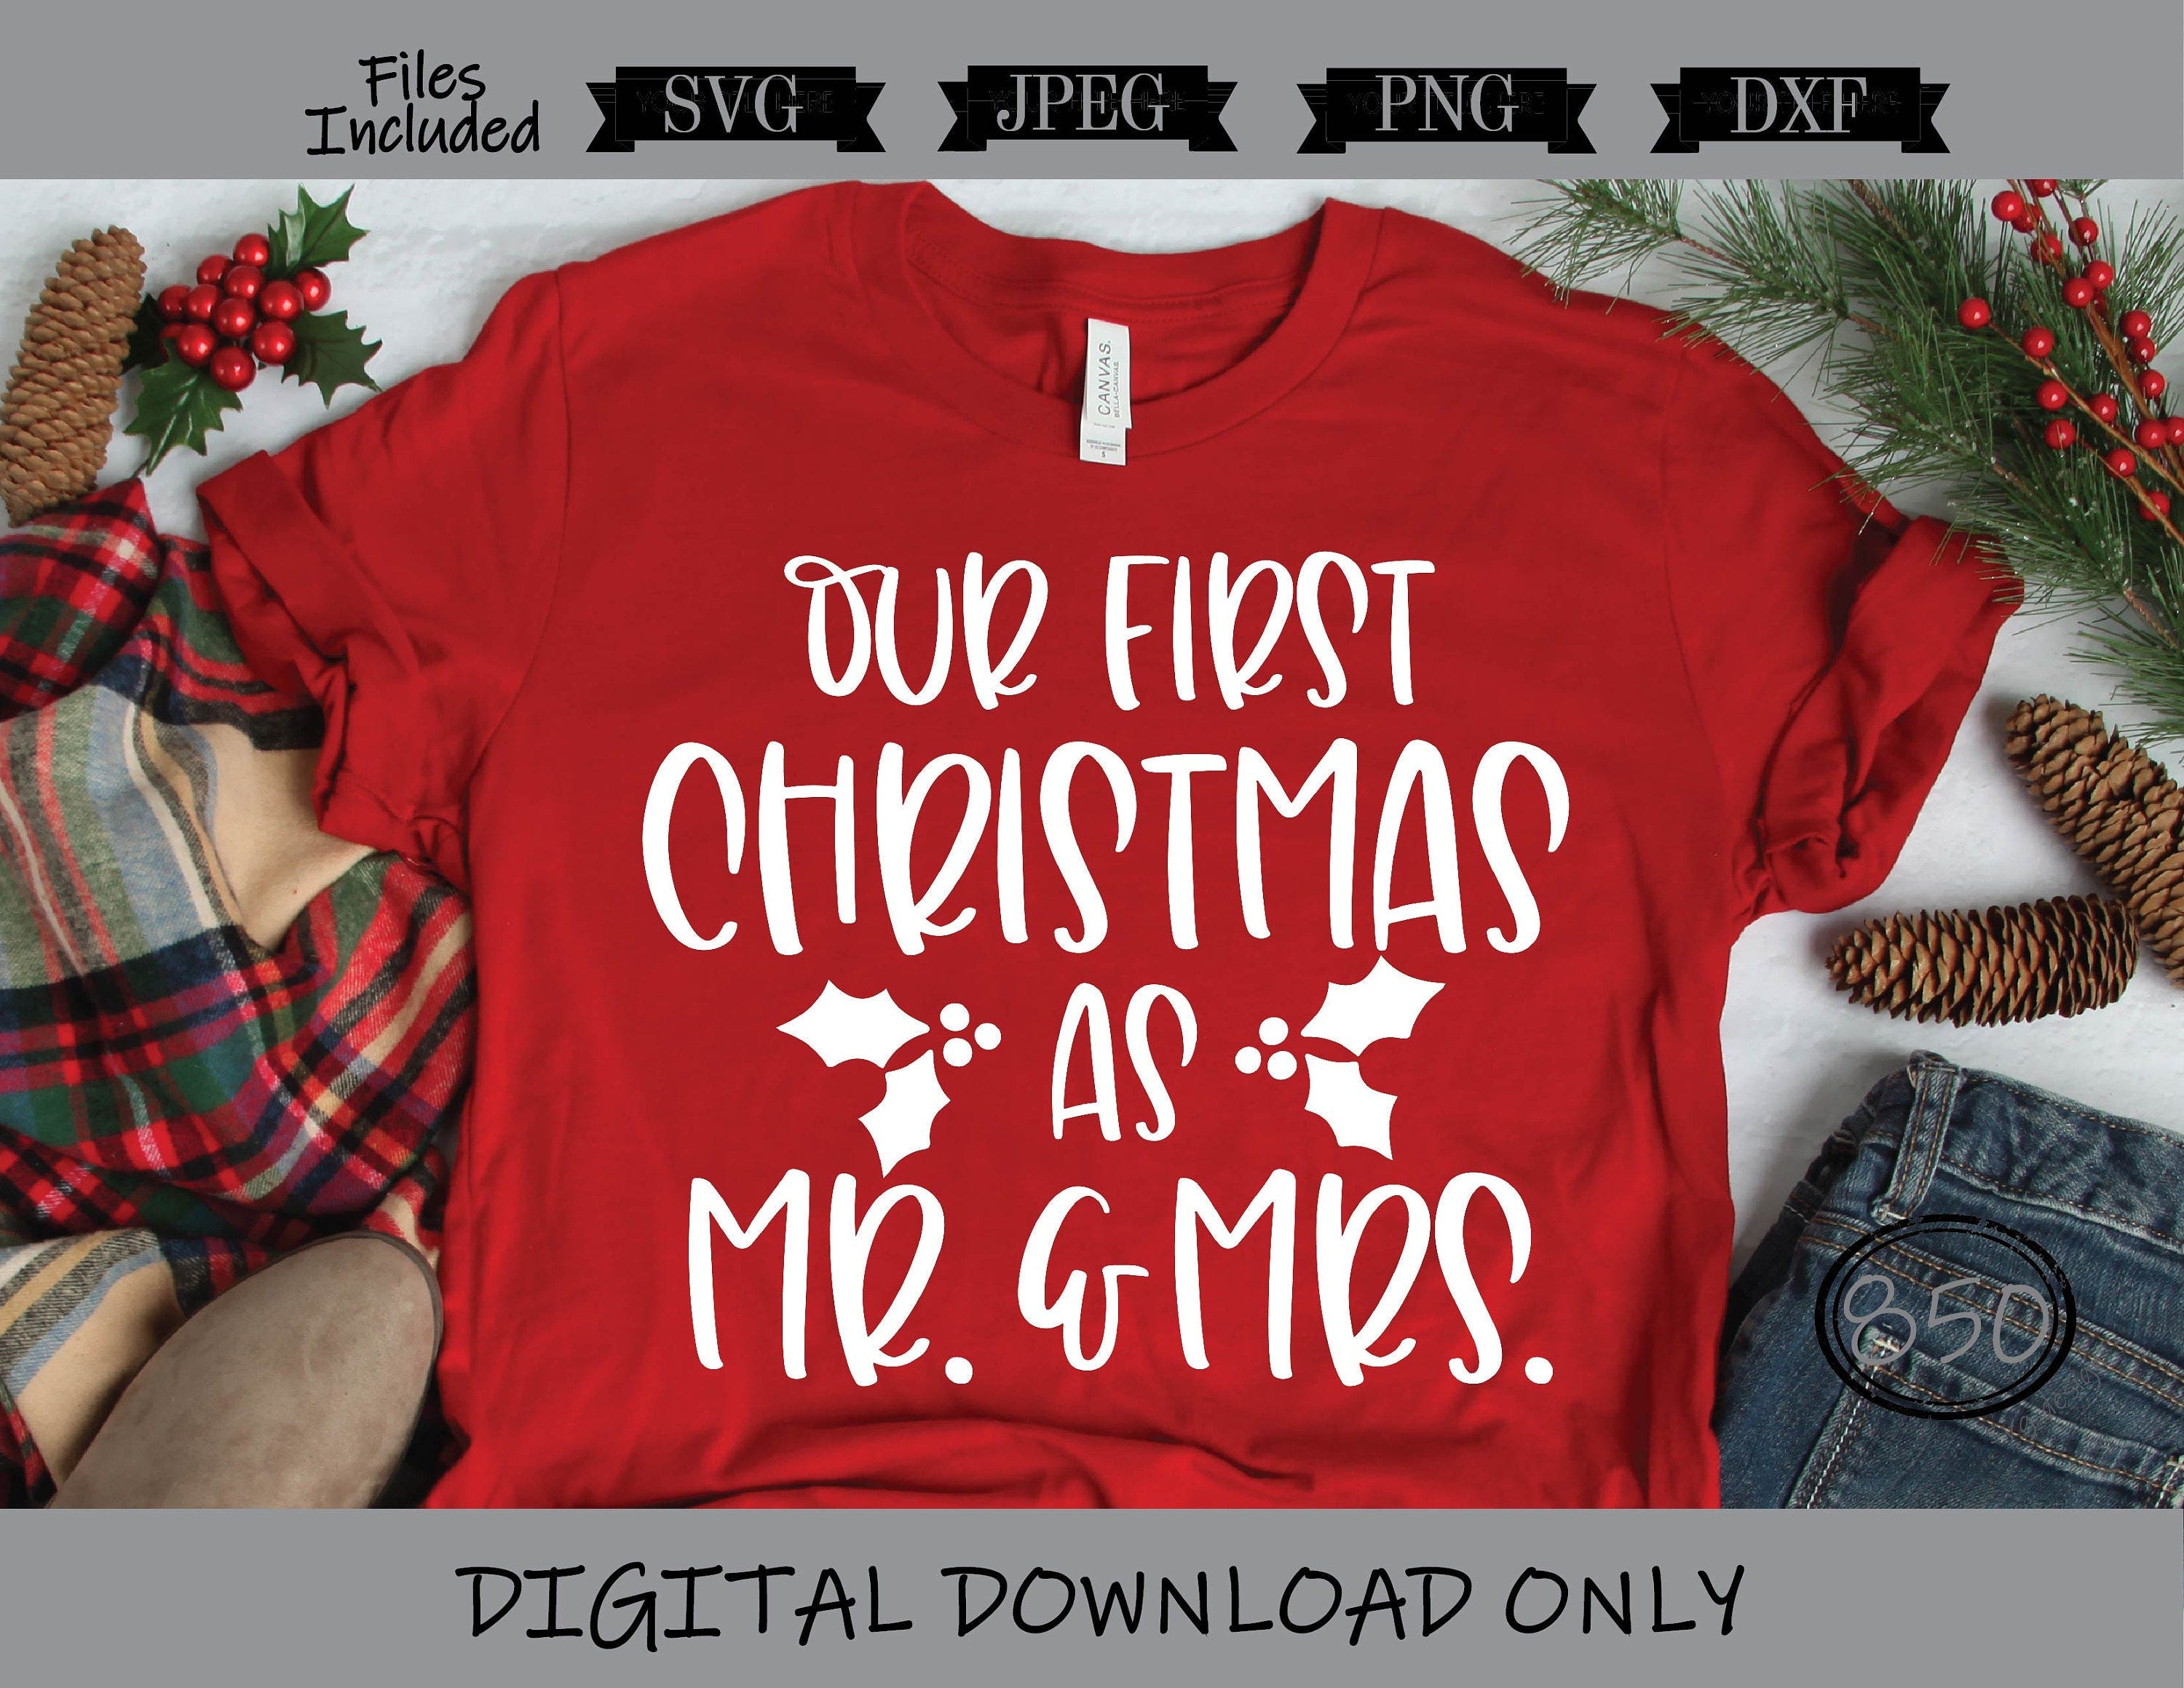 Our First Christmas As Mr. and Mrs. SVG dxf png jpg